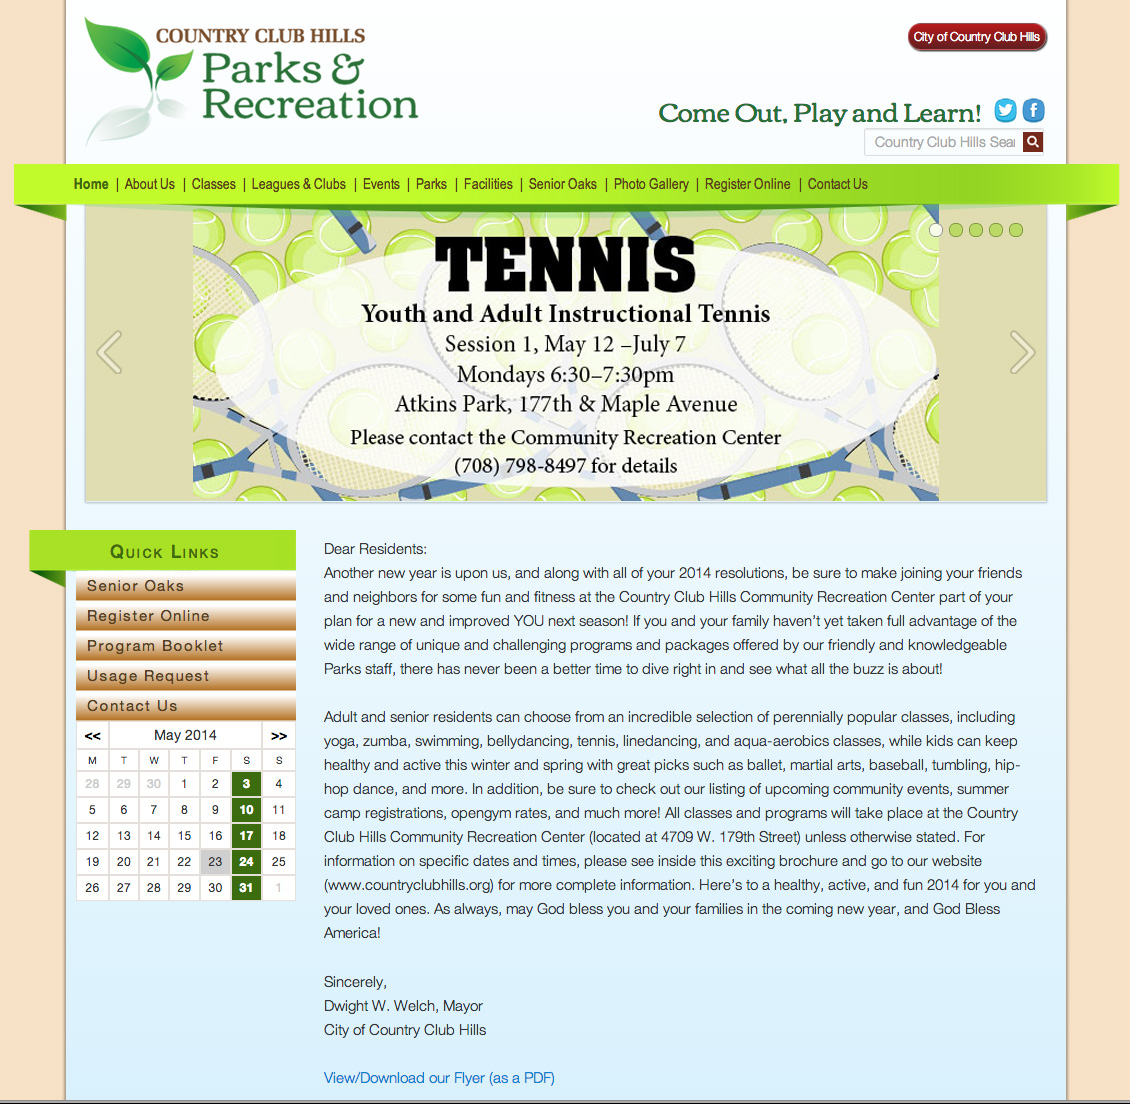 Country Club Hills – Parks & Recreation Website